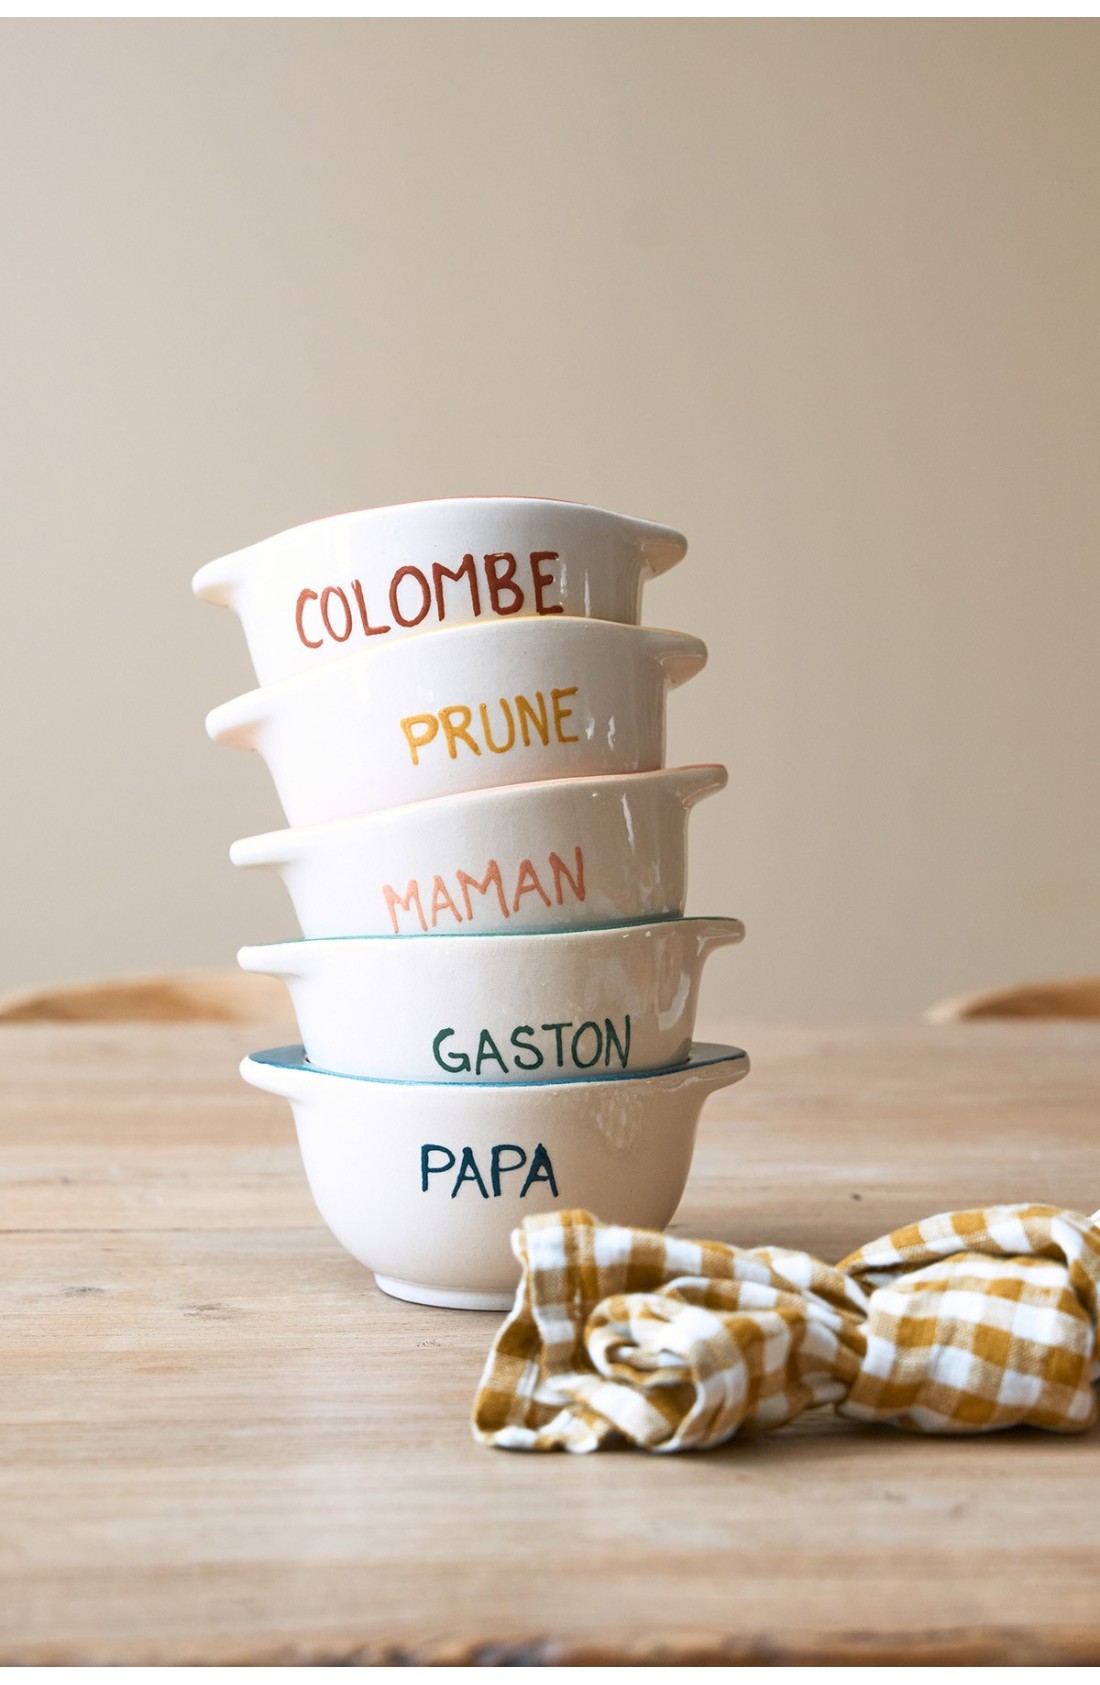 Personalized bowls